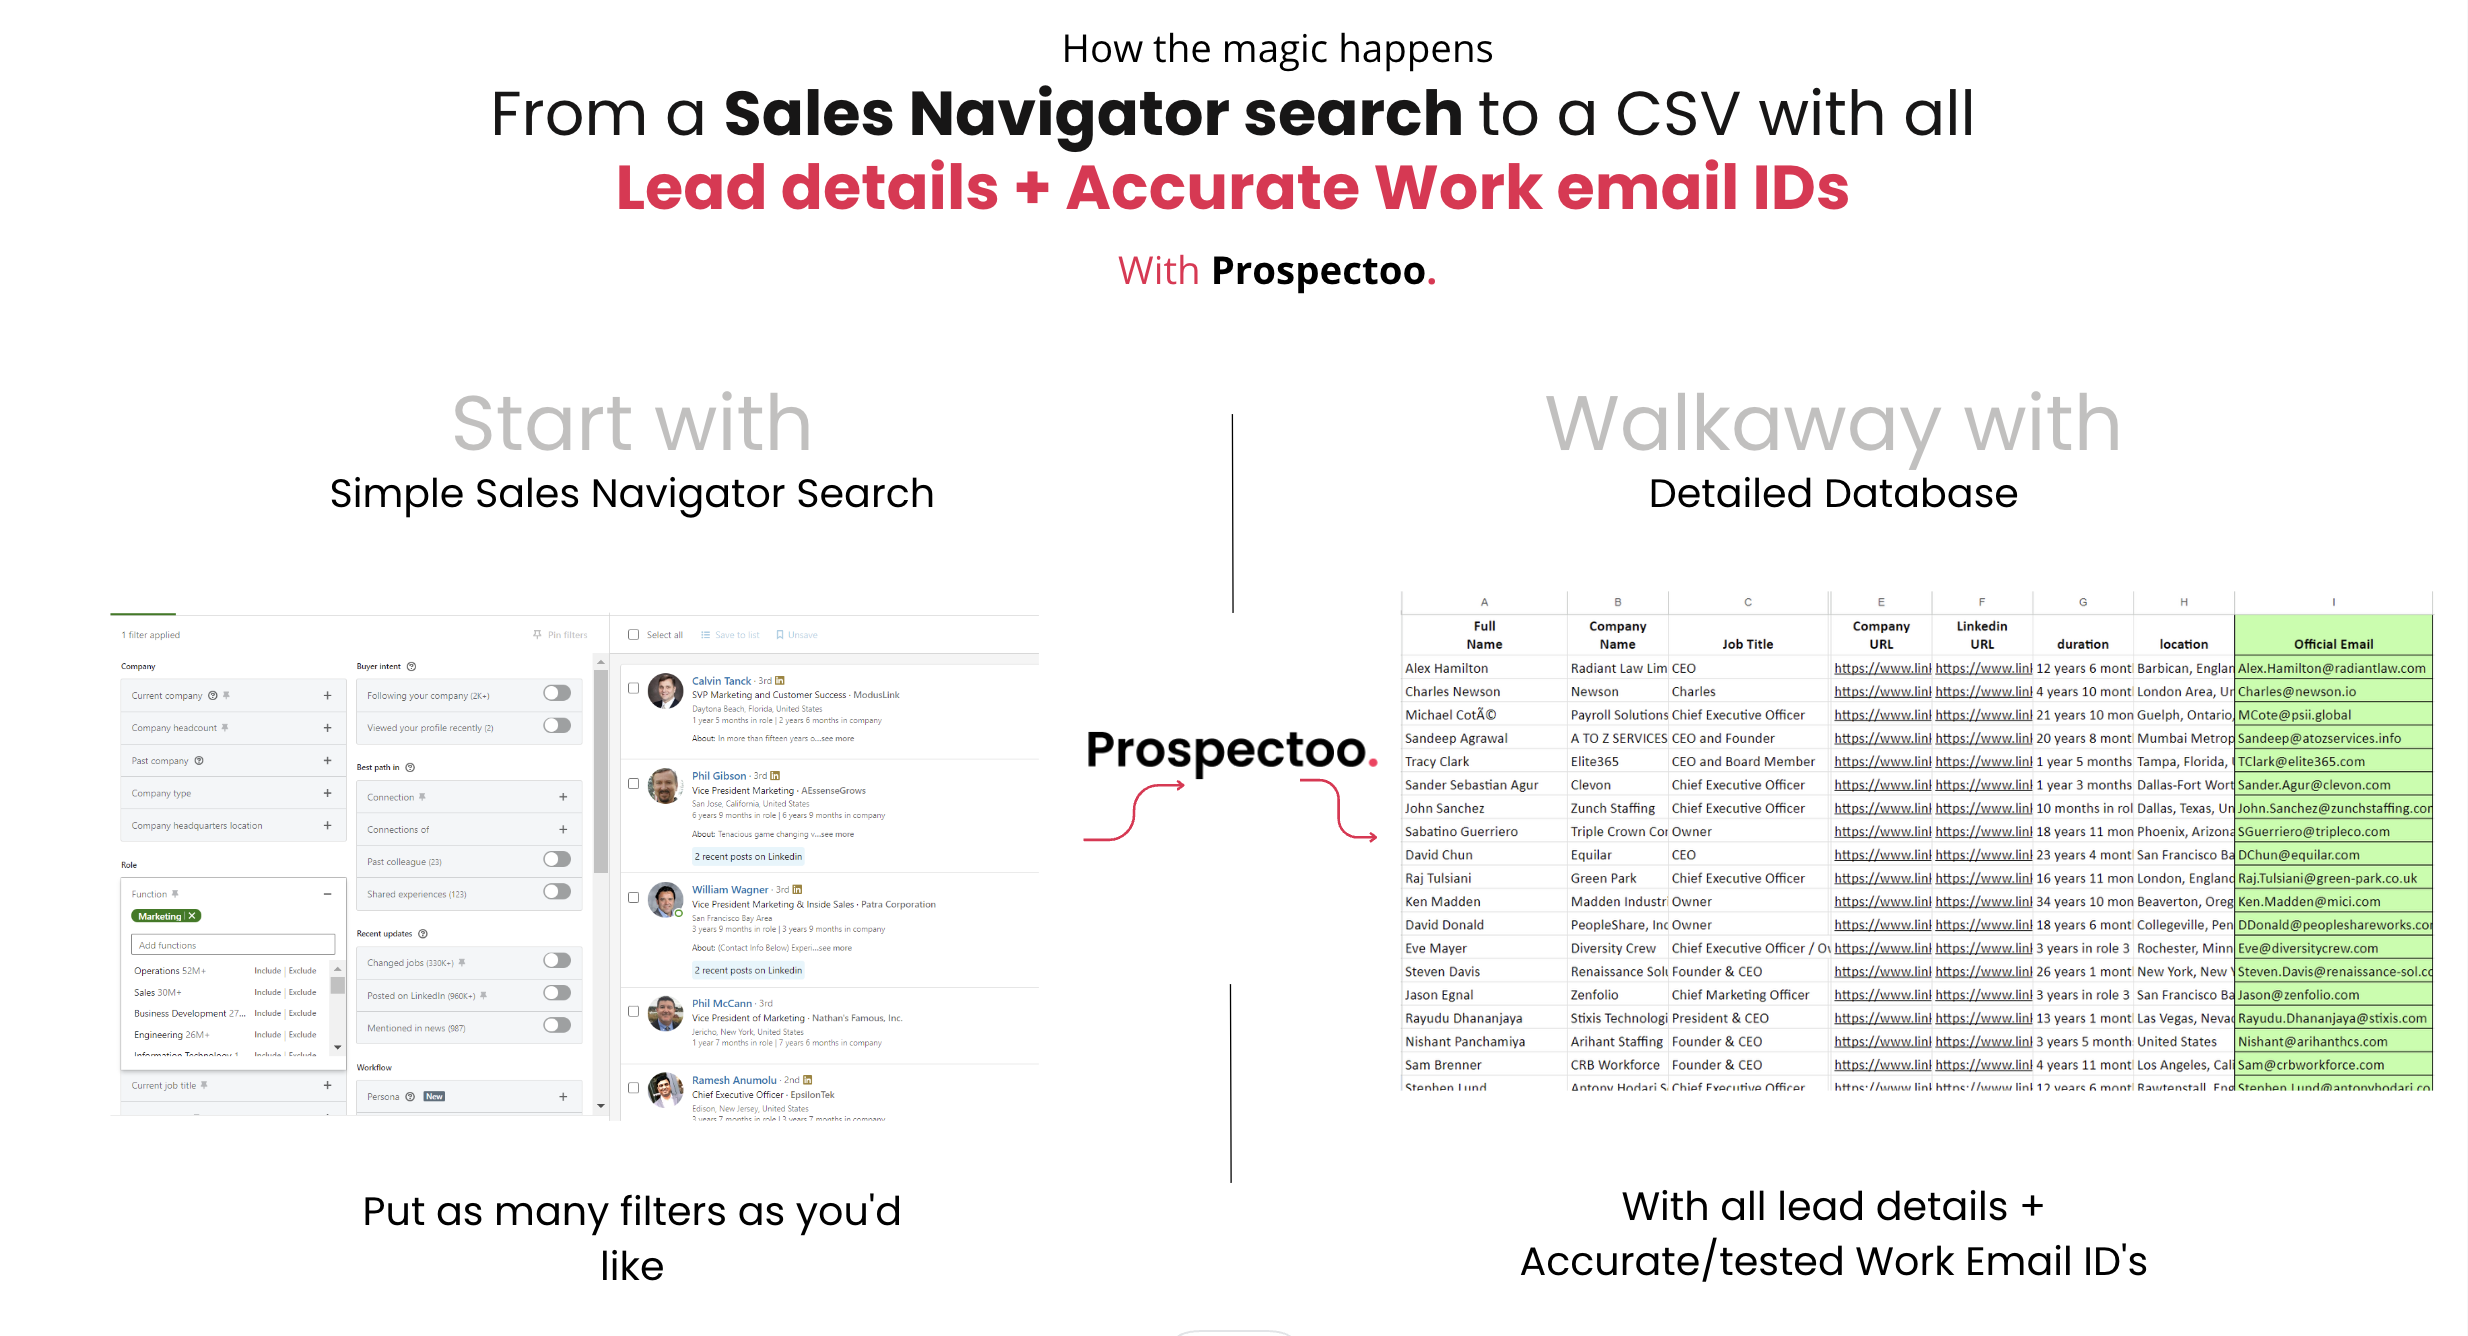 Use Prospectoo to convert your Sales Navigator Search into a Lead List.